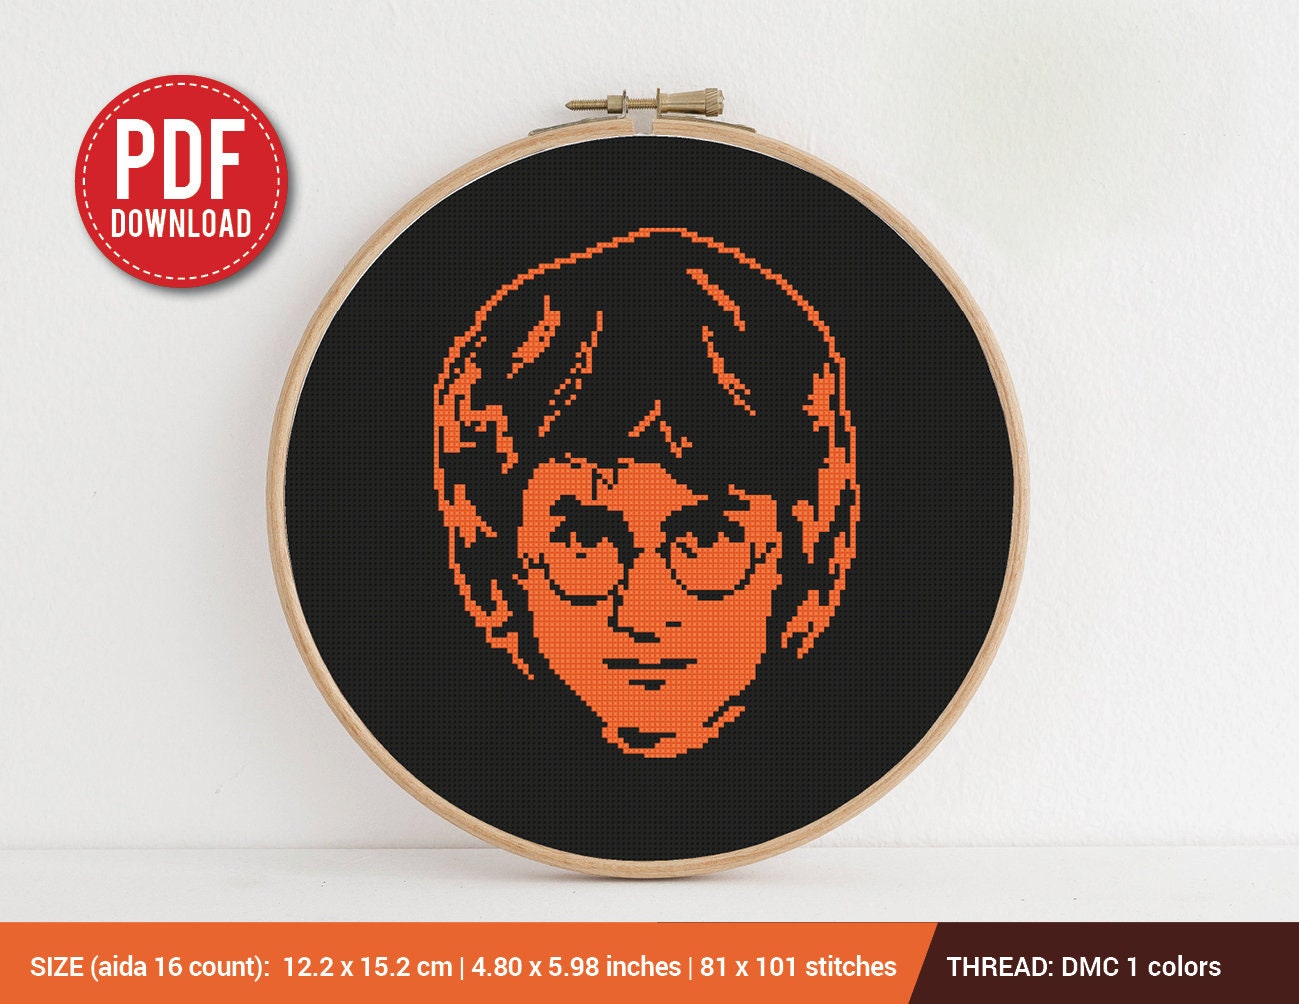 Voldemort Harry Potter Cross Stitch Kits Needlework Counted Kits Embroidery  Craft Cross-stitch DIY Home Dumbledore Ron Hermione Snape 